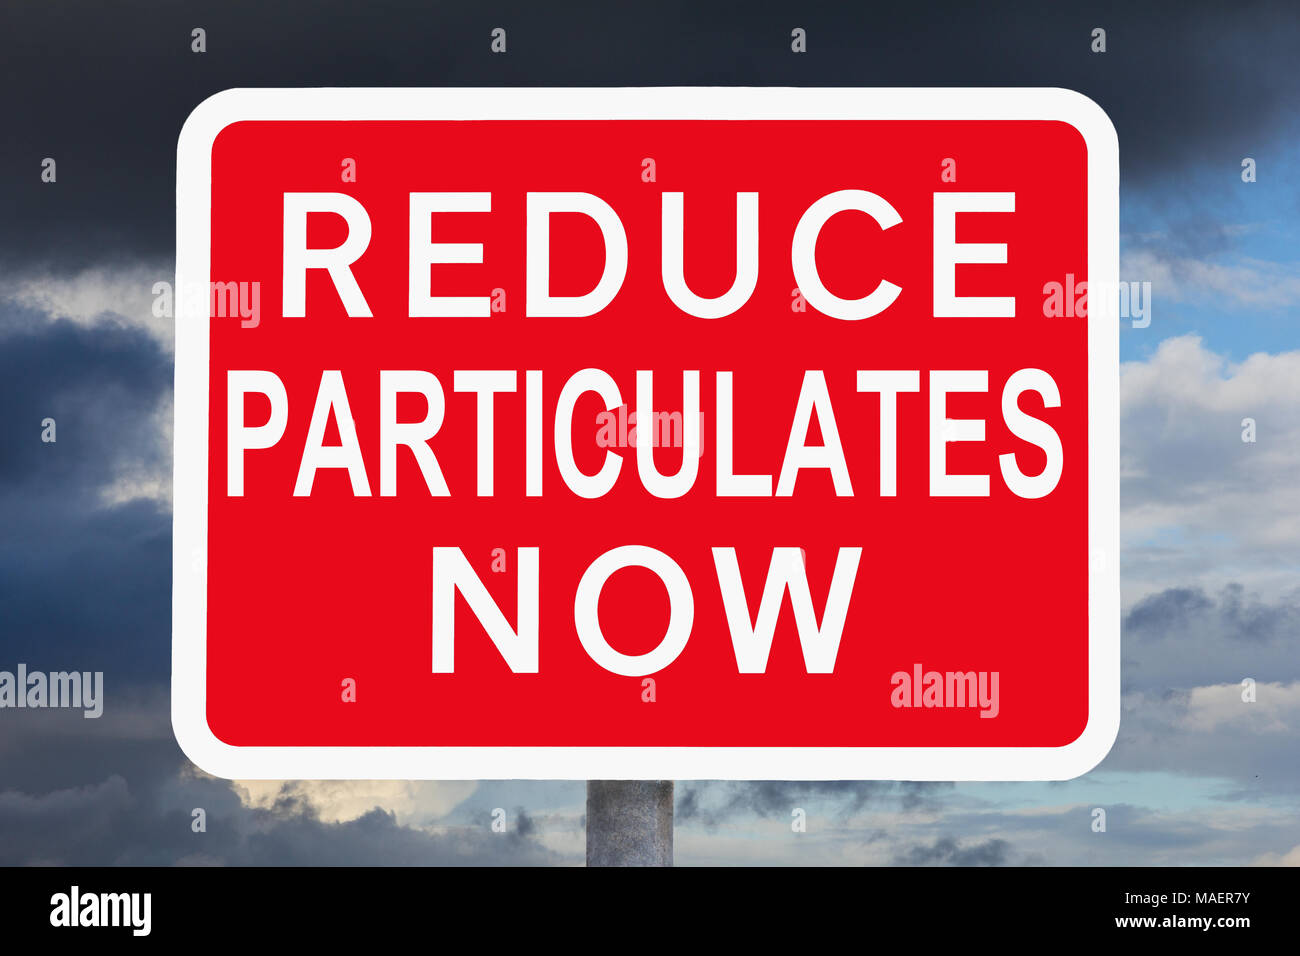 Red and white warning sign REDUCE PARTICULATES NOW in front of a sky with very dark clouds, variation of a british traffic sign Stock Photo